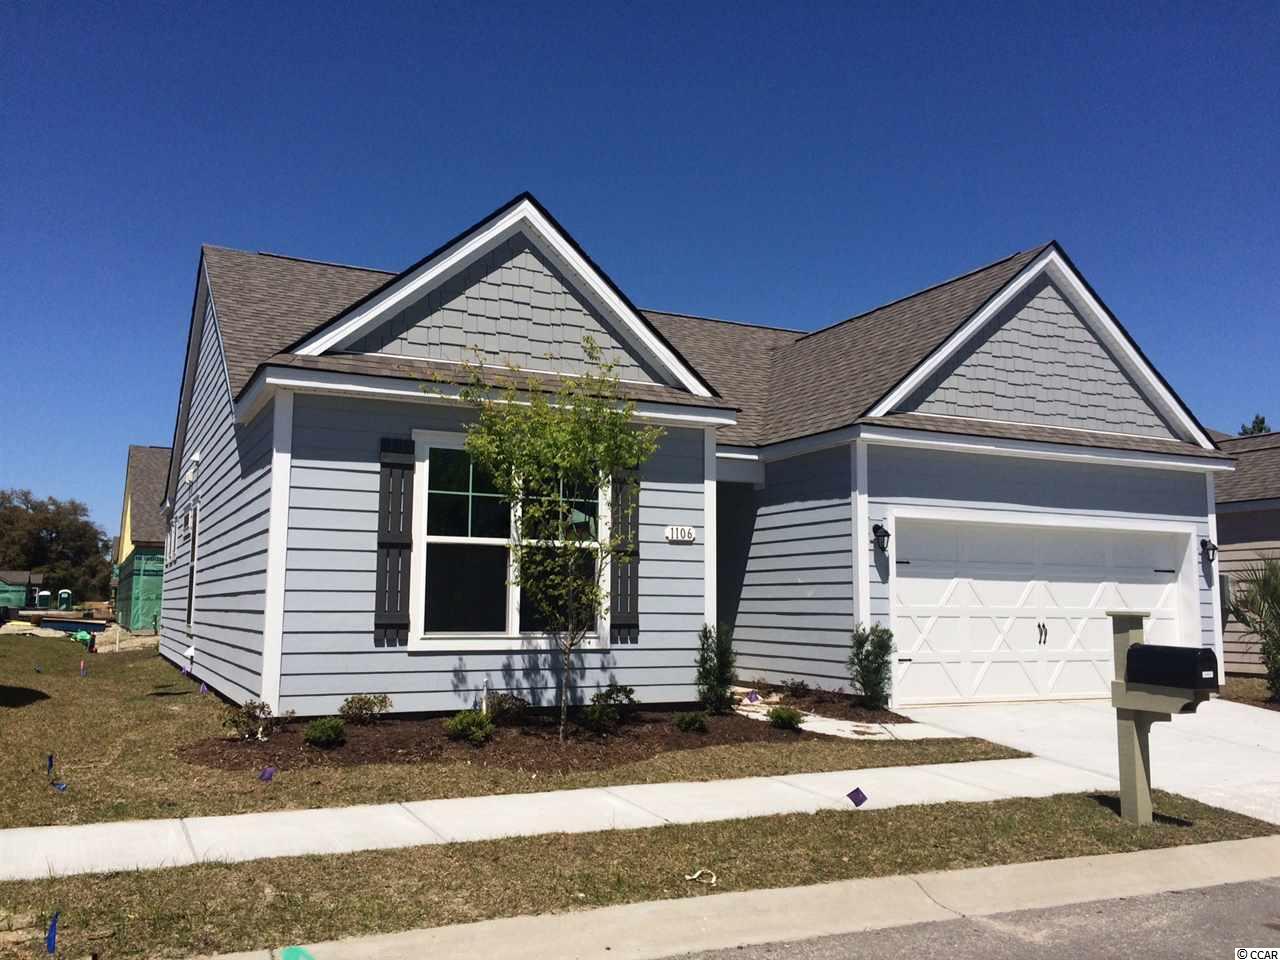 1106 Sulley Ave. North Myrtle Beach, SC 29582